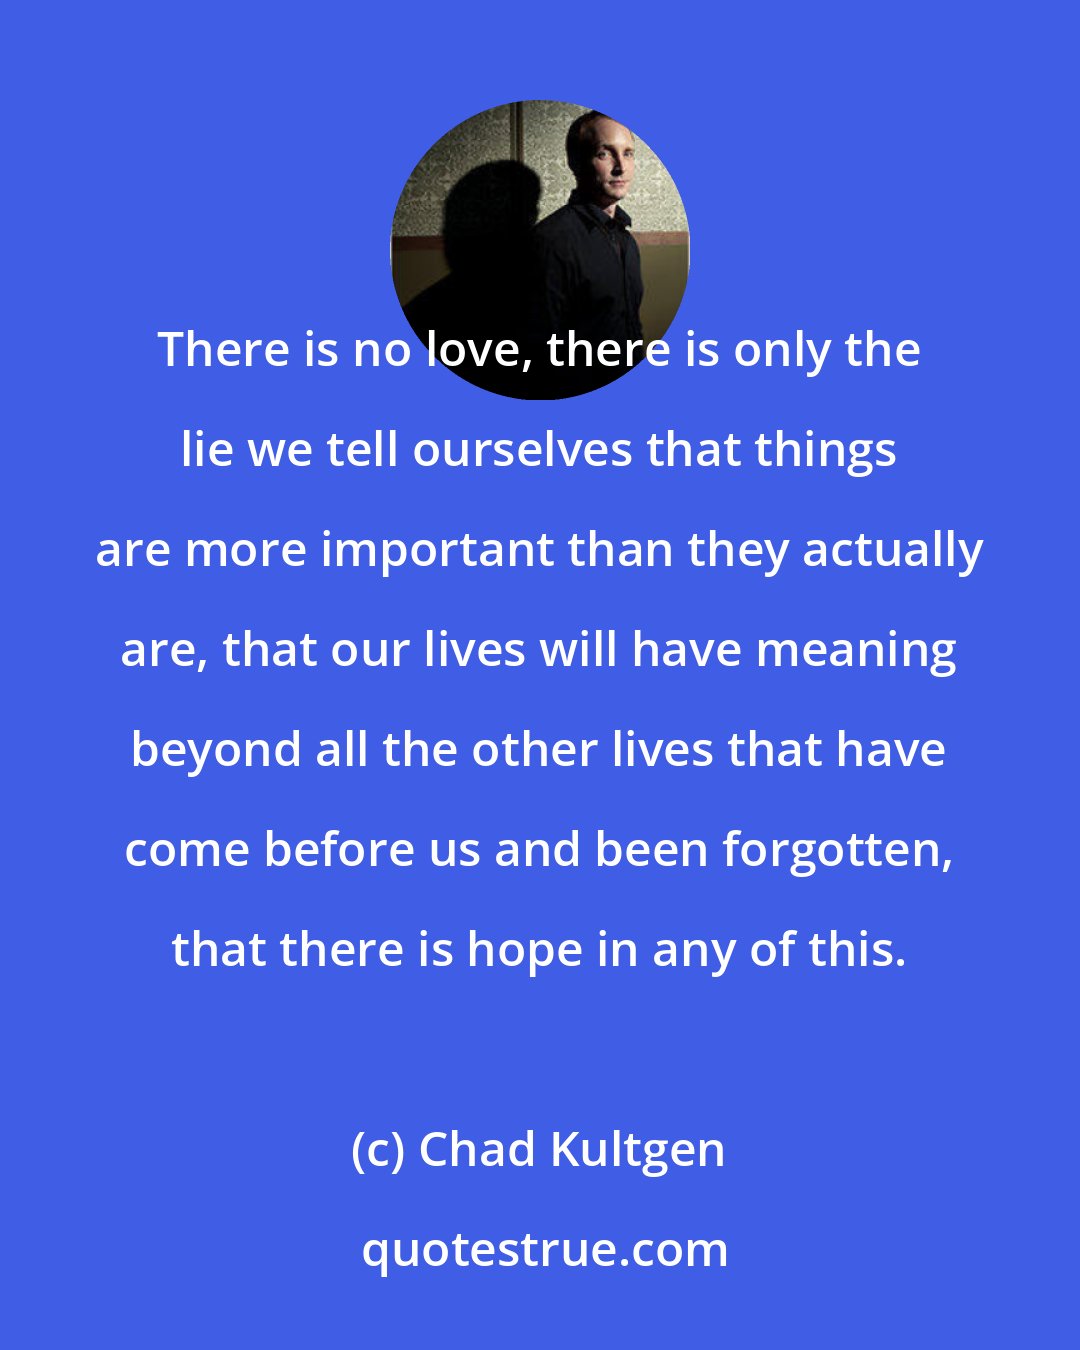 Chad Kultgen: There is no love, there is only the lie we tell ourselves that things are more important than they actually are, that our lives will have meaning beyond all the other lives that have come before us and been forgotten, that there is hope in any of this.